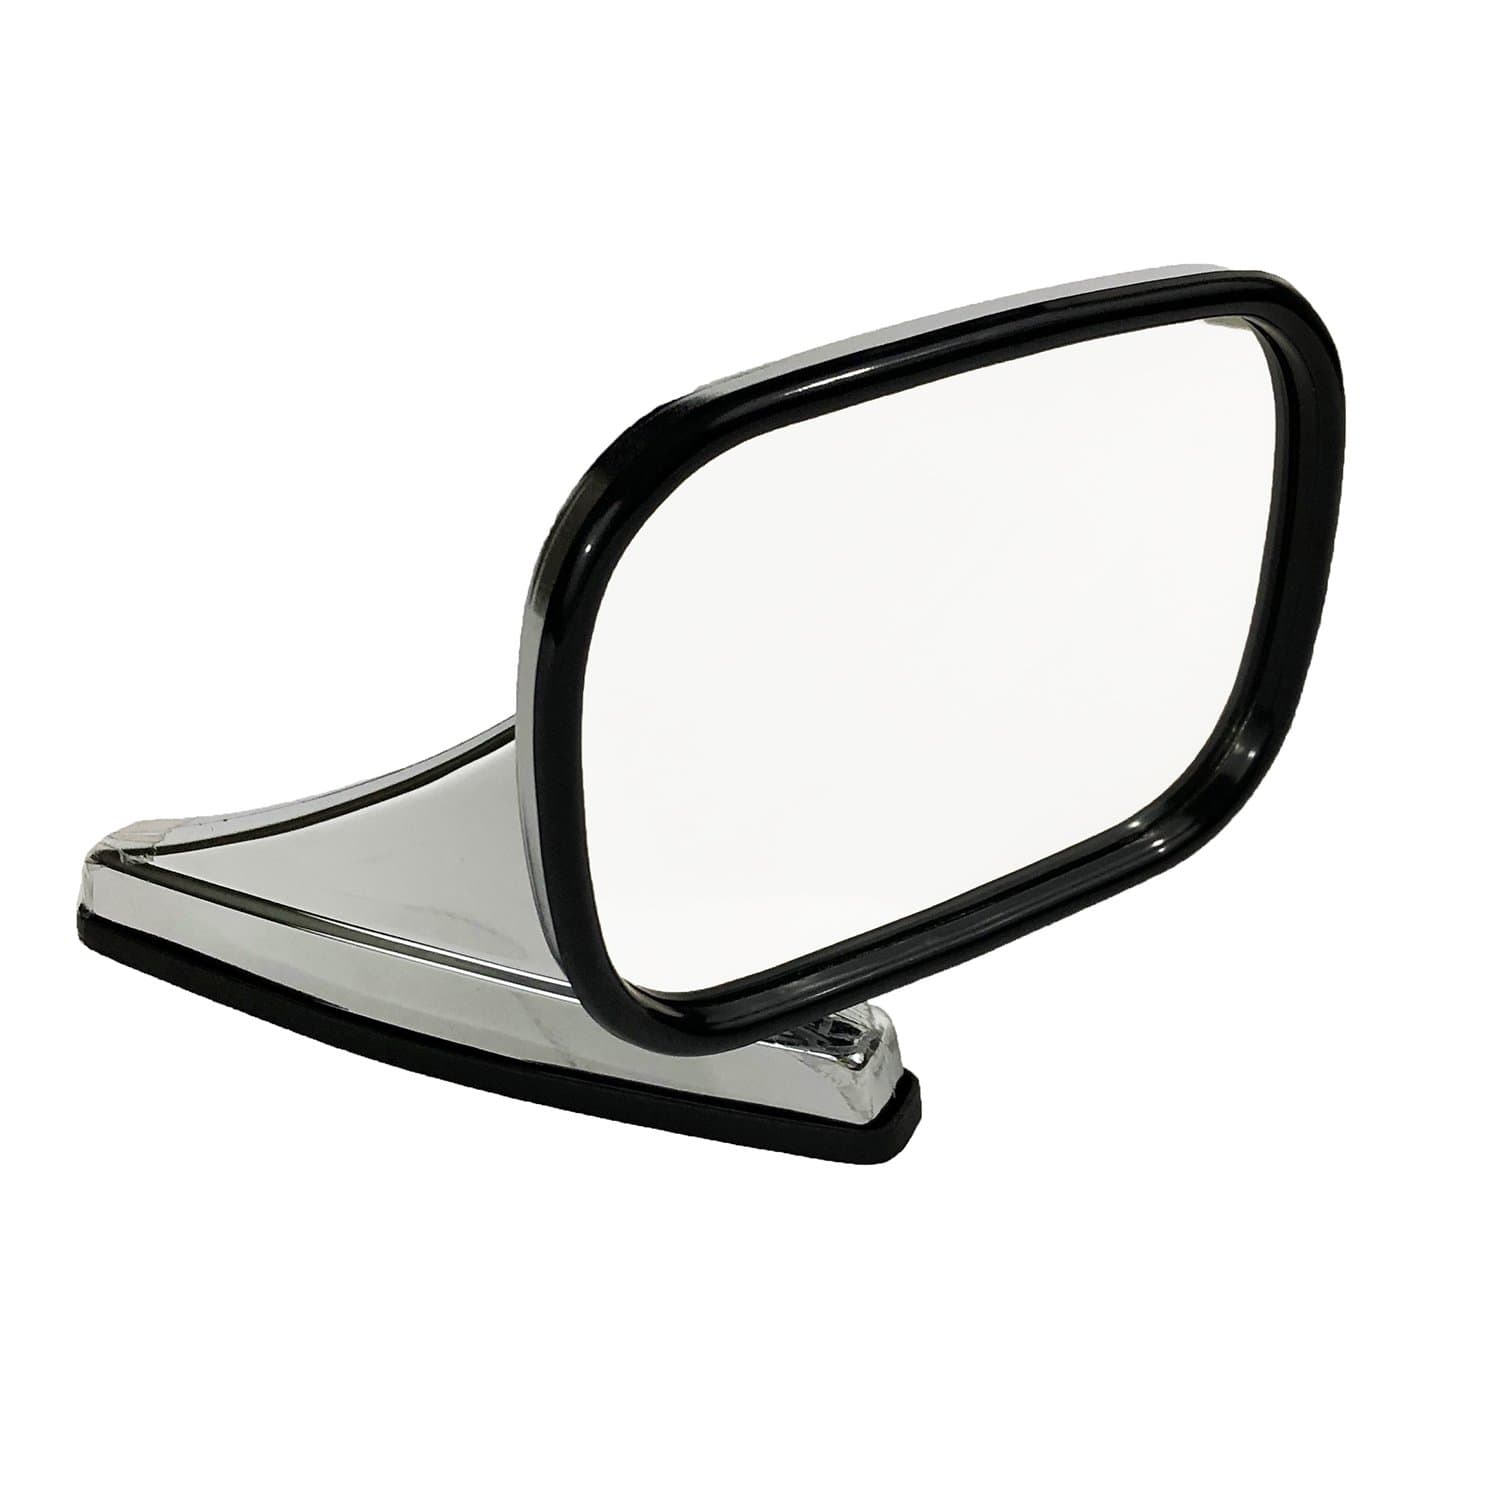 K Source Fit System Classic Oblong Style Universal Car Mirror, LH or RH (1401)